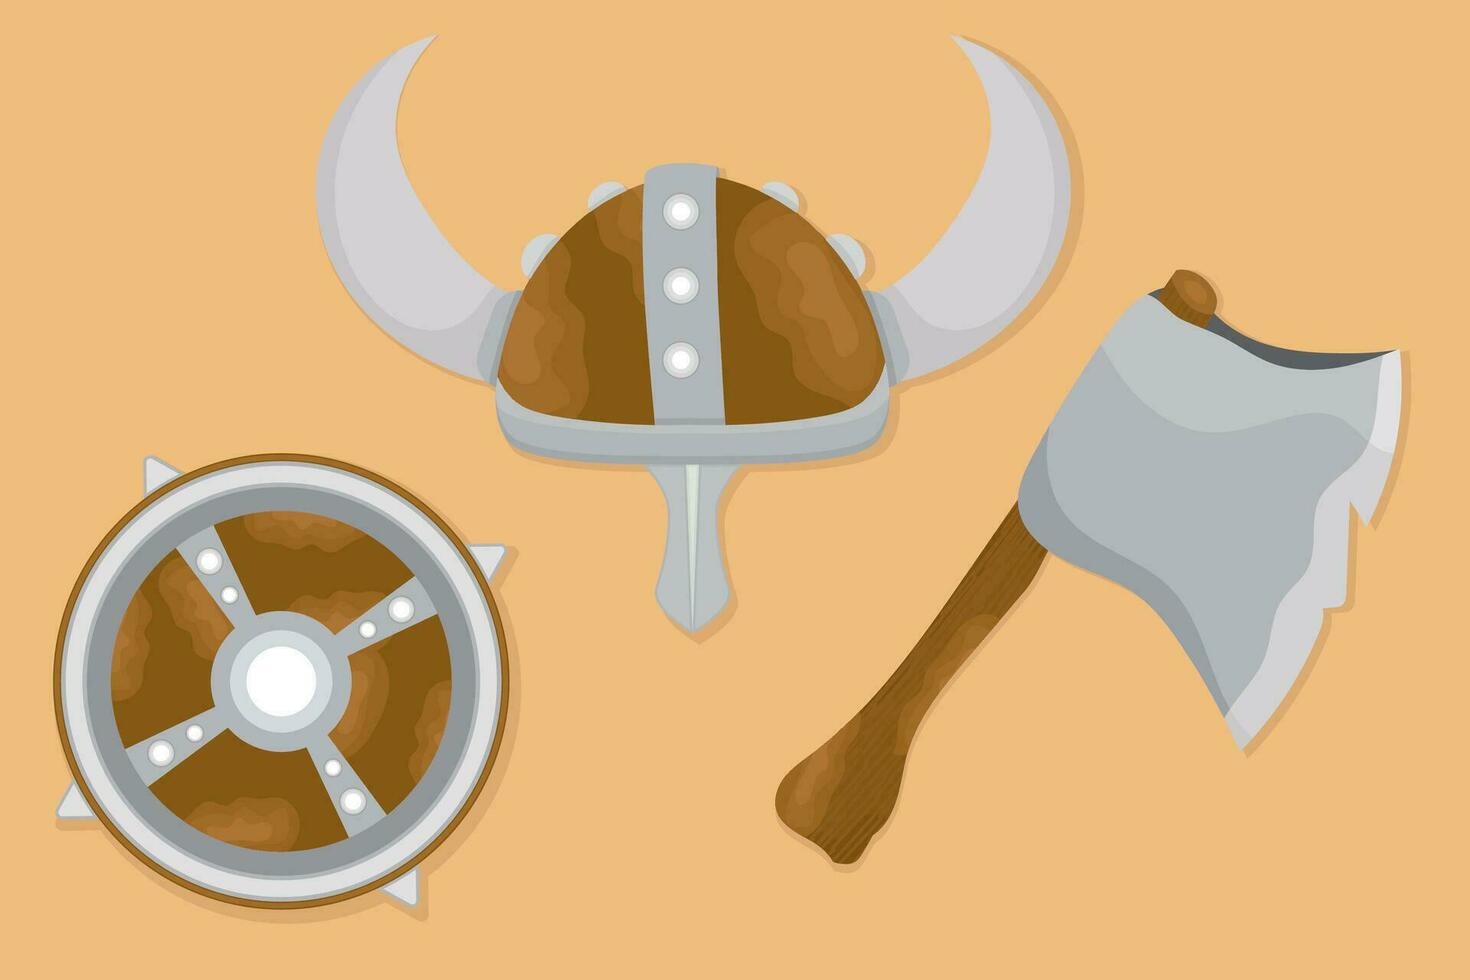 Viking game props icons, helmet battle axe, shield in flat color. vector